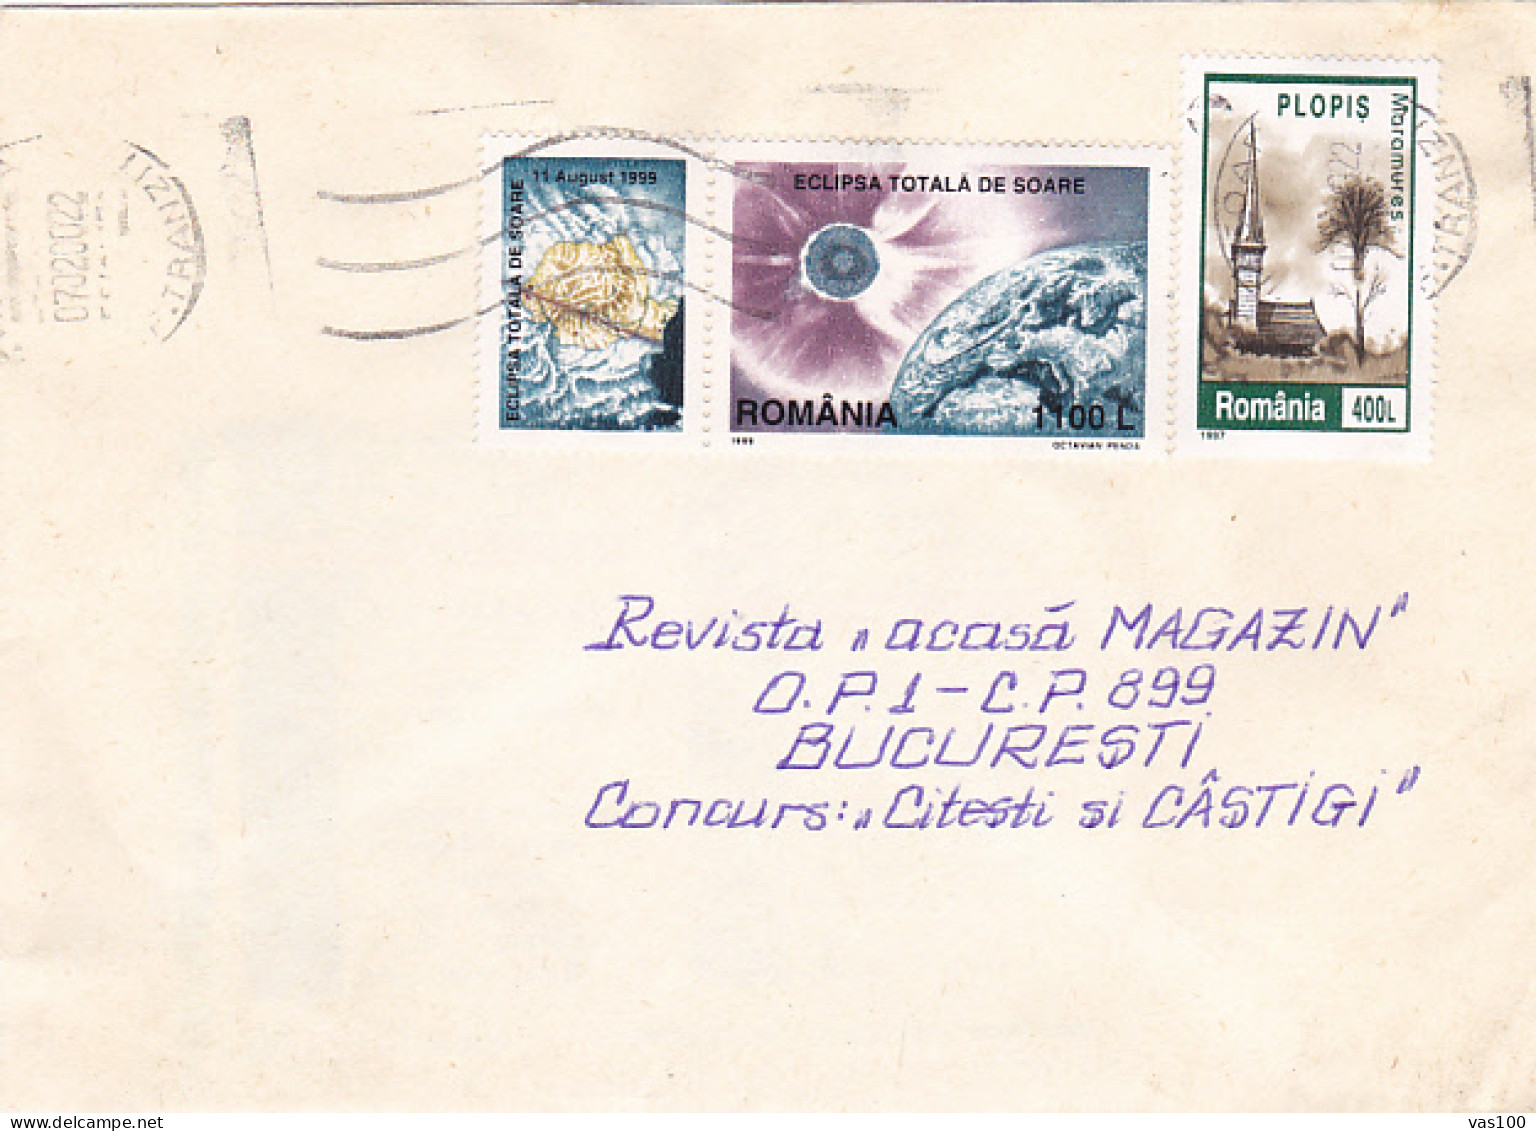 TOTAL SOLAR ECLIPSE, MARAMURES WOODEN CHURCH, STAMPS ON COVER, 2000, ROMANIA - Covers & Documents